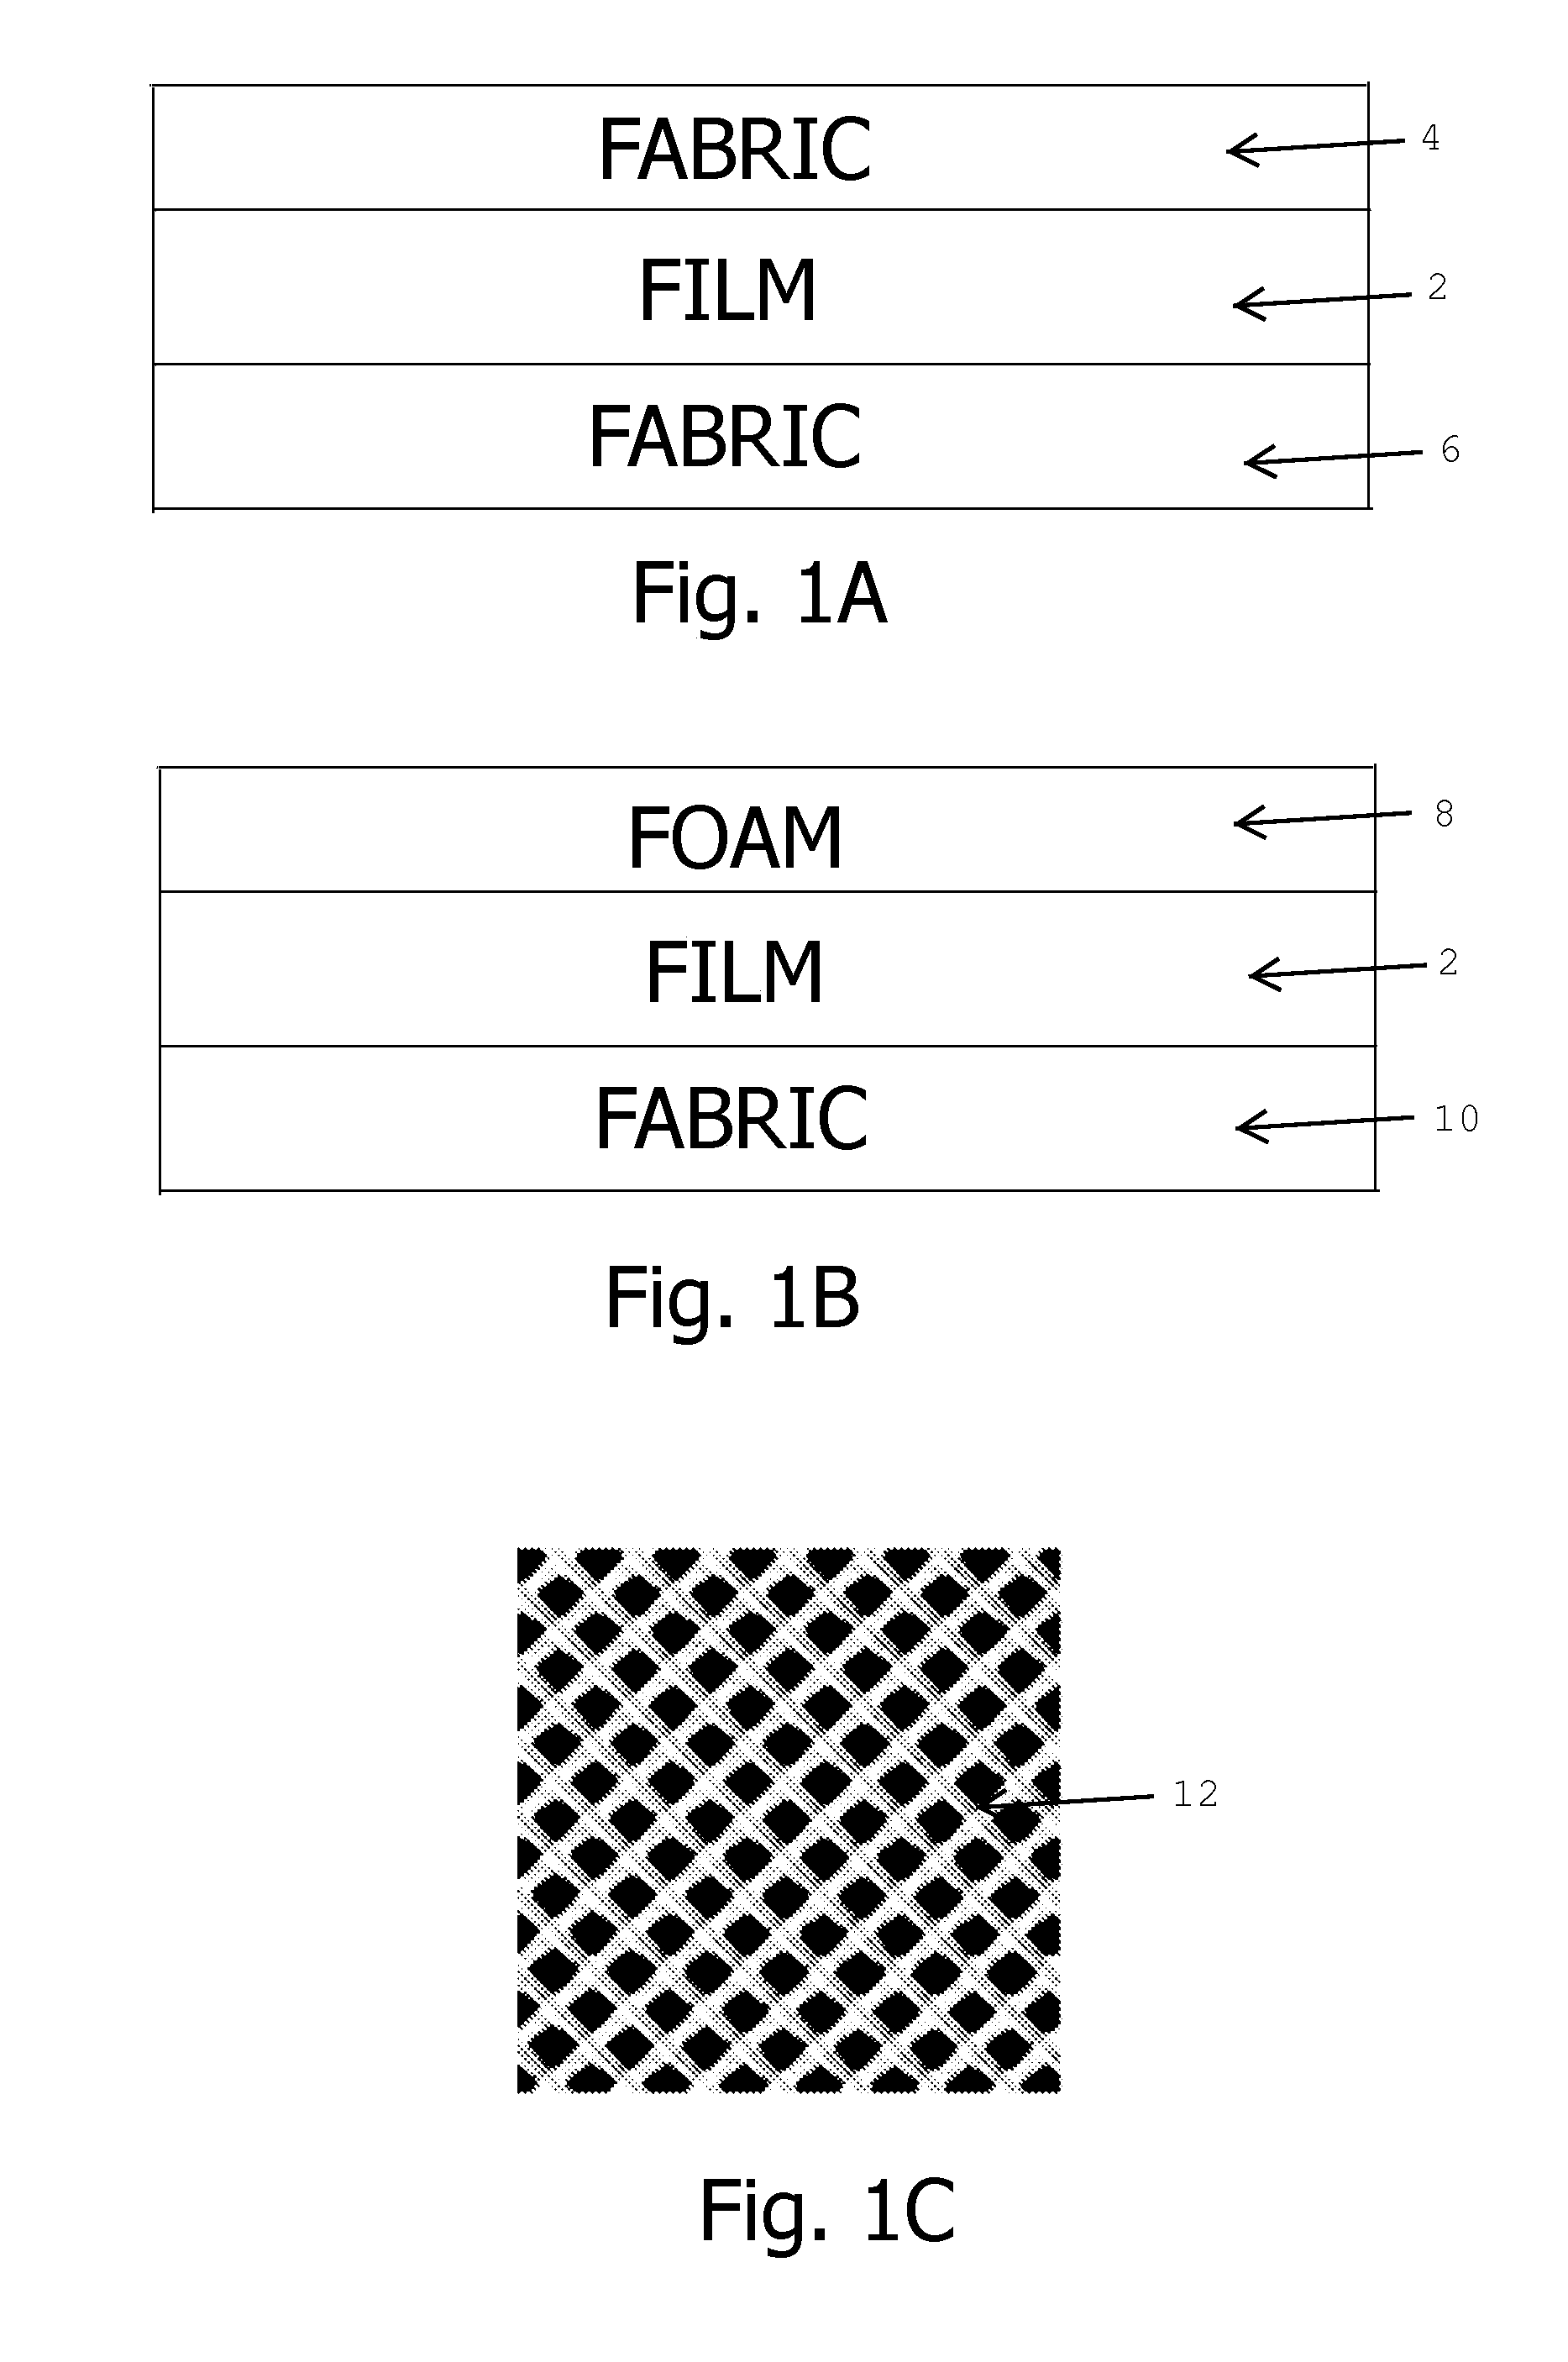 Antimicrobial, infection-control and odor-control film and film composite